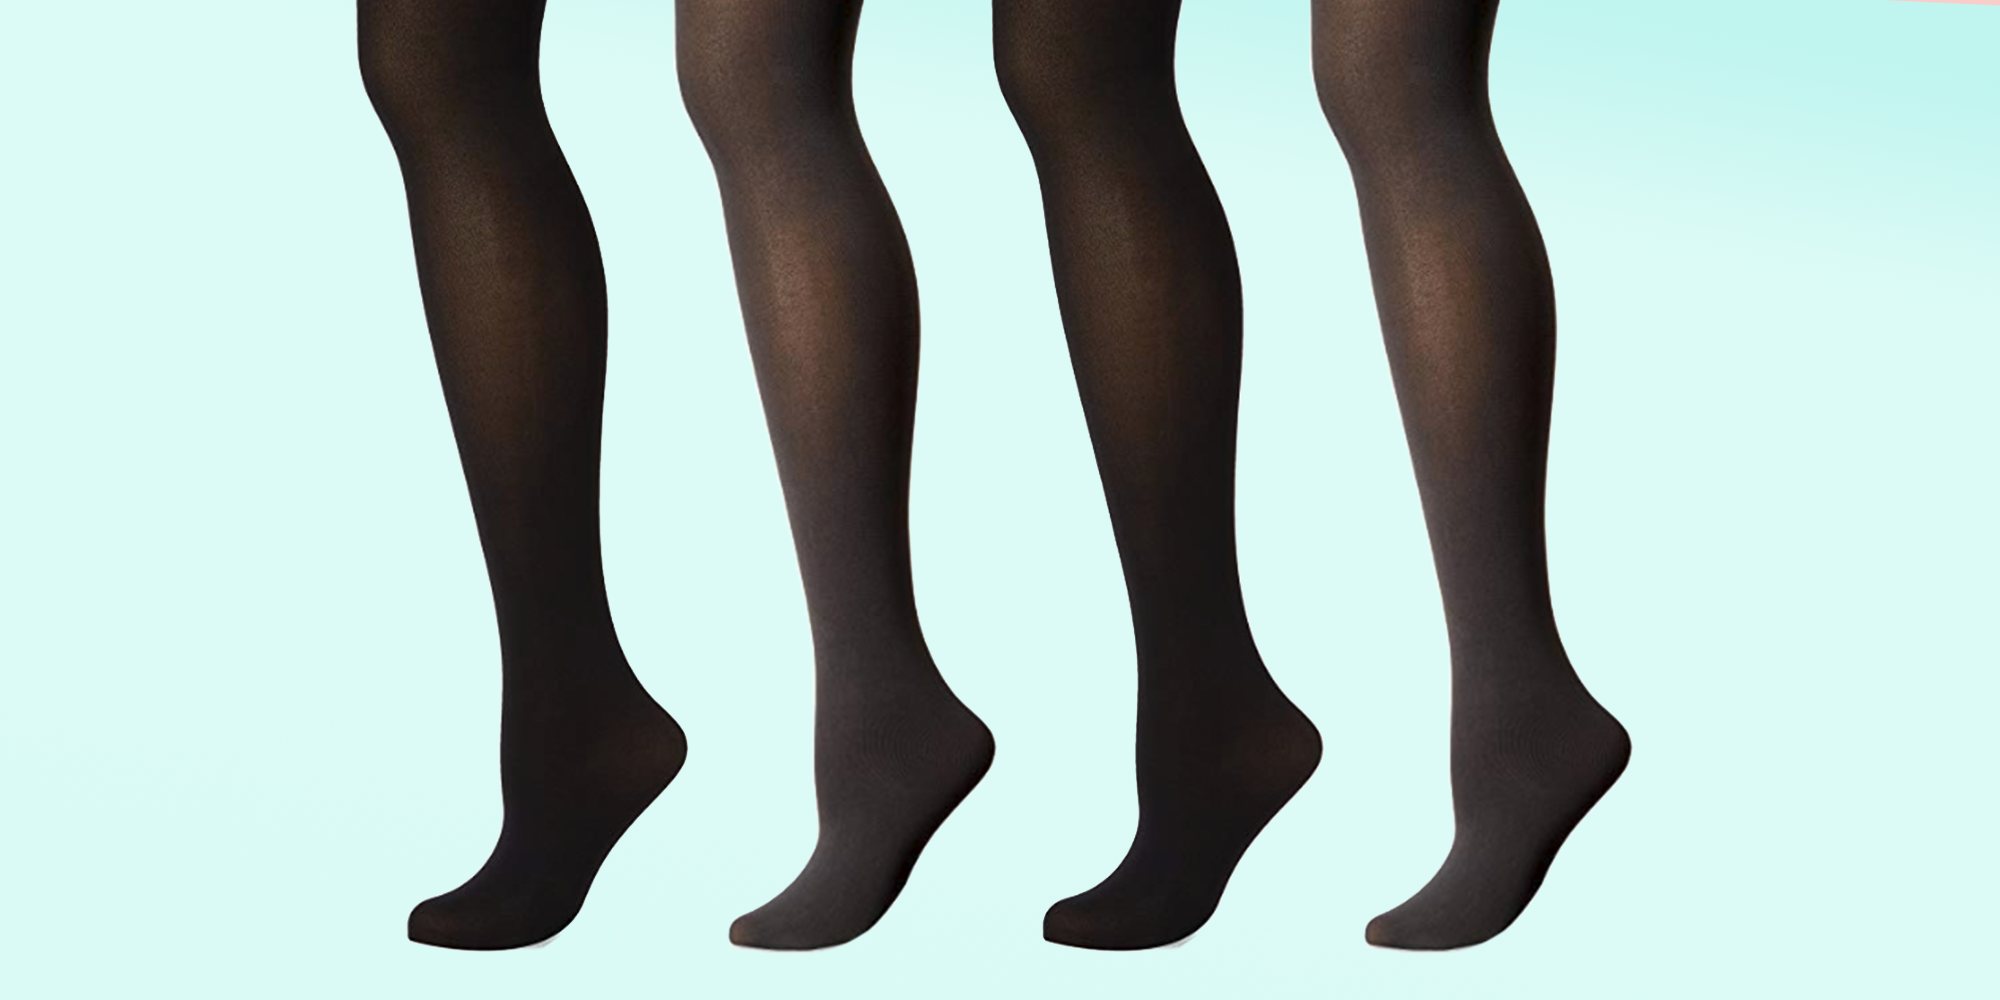 Top Rated Pantyhose for Women